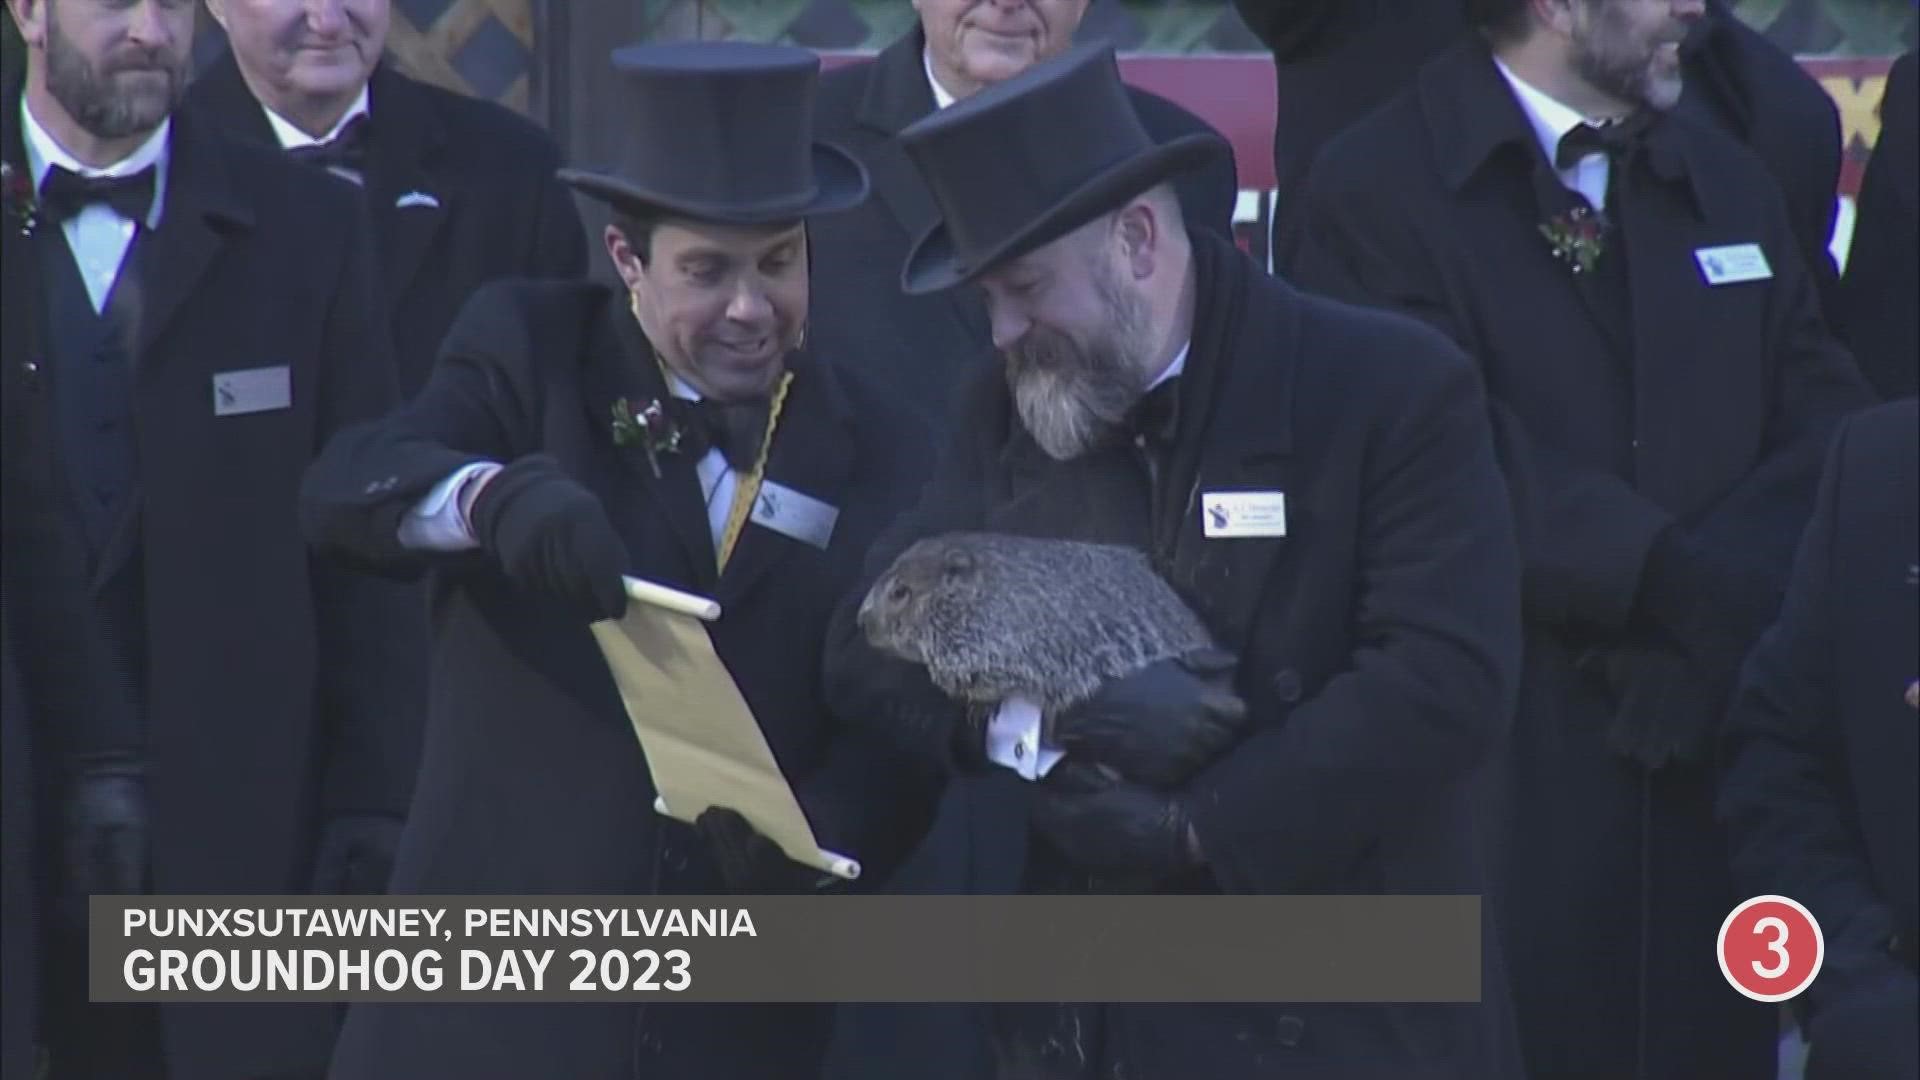 It's official. Punxsutawney Phil is calling for six more weeks of winter.